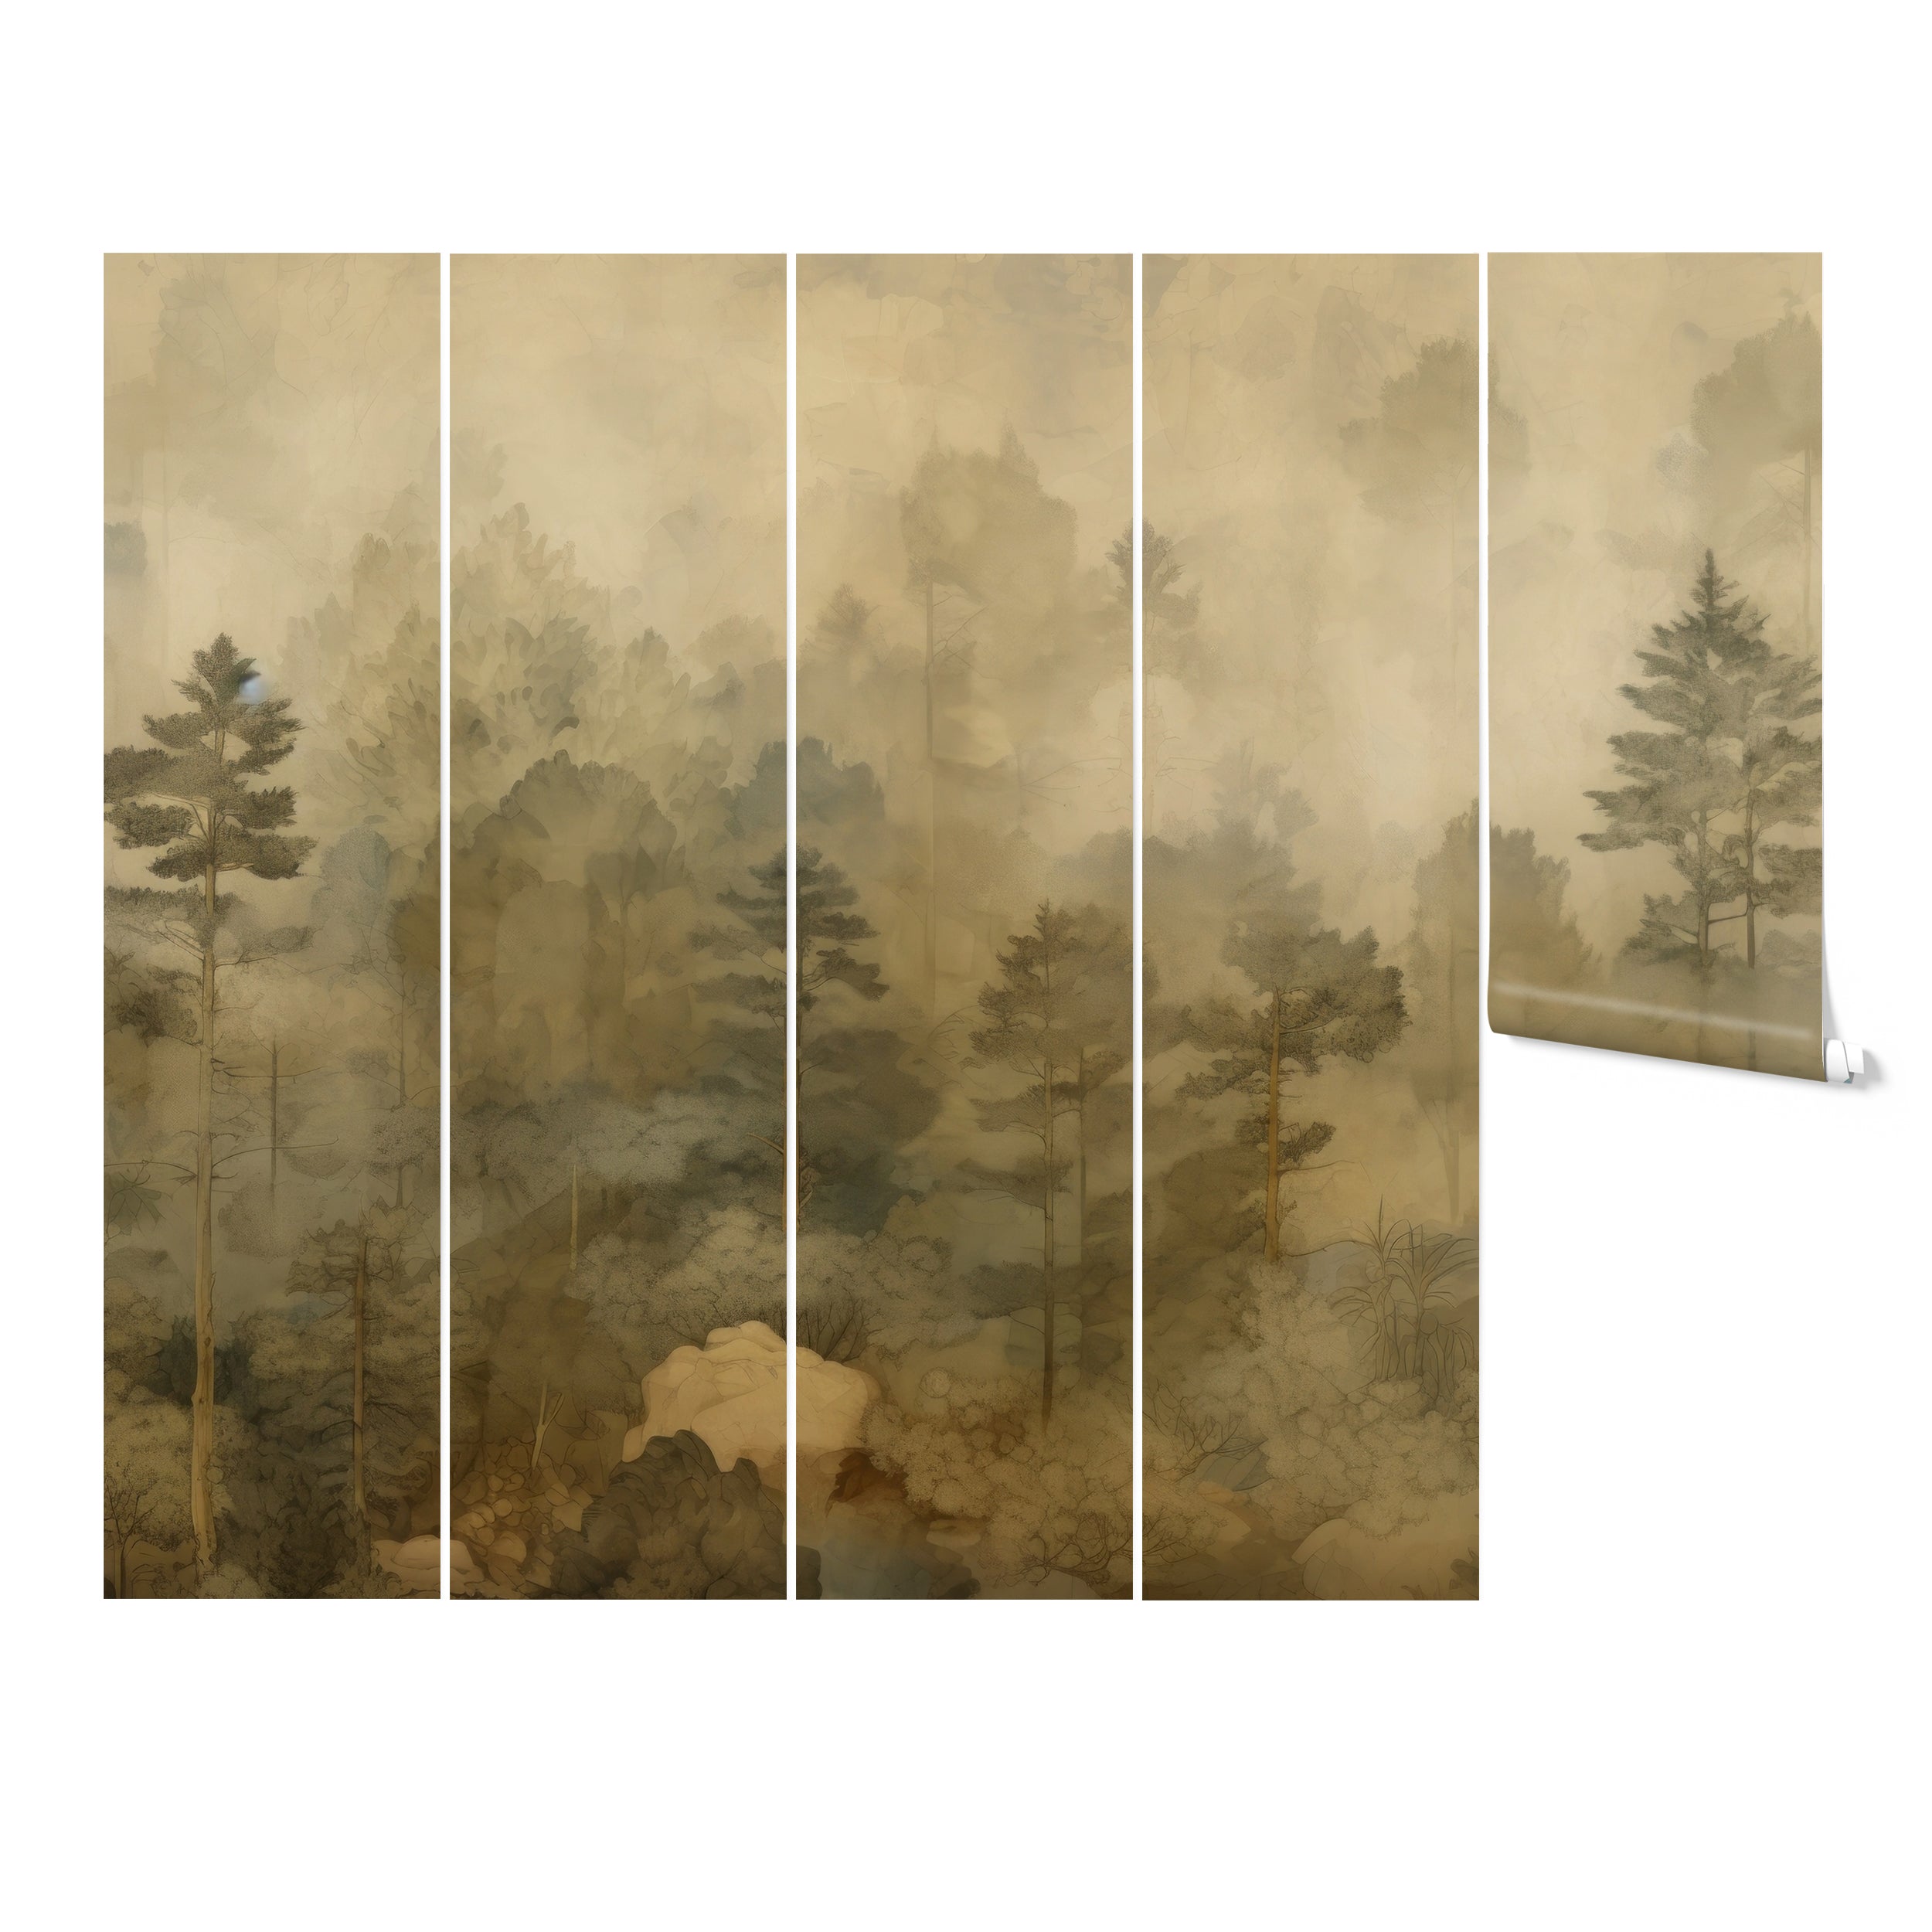 Rolled wallpaper mural with a design of a misty forest landscape, packaged for home installation."